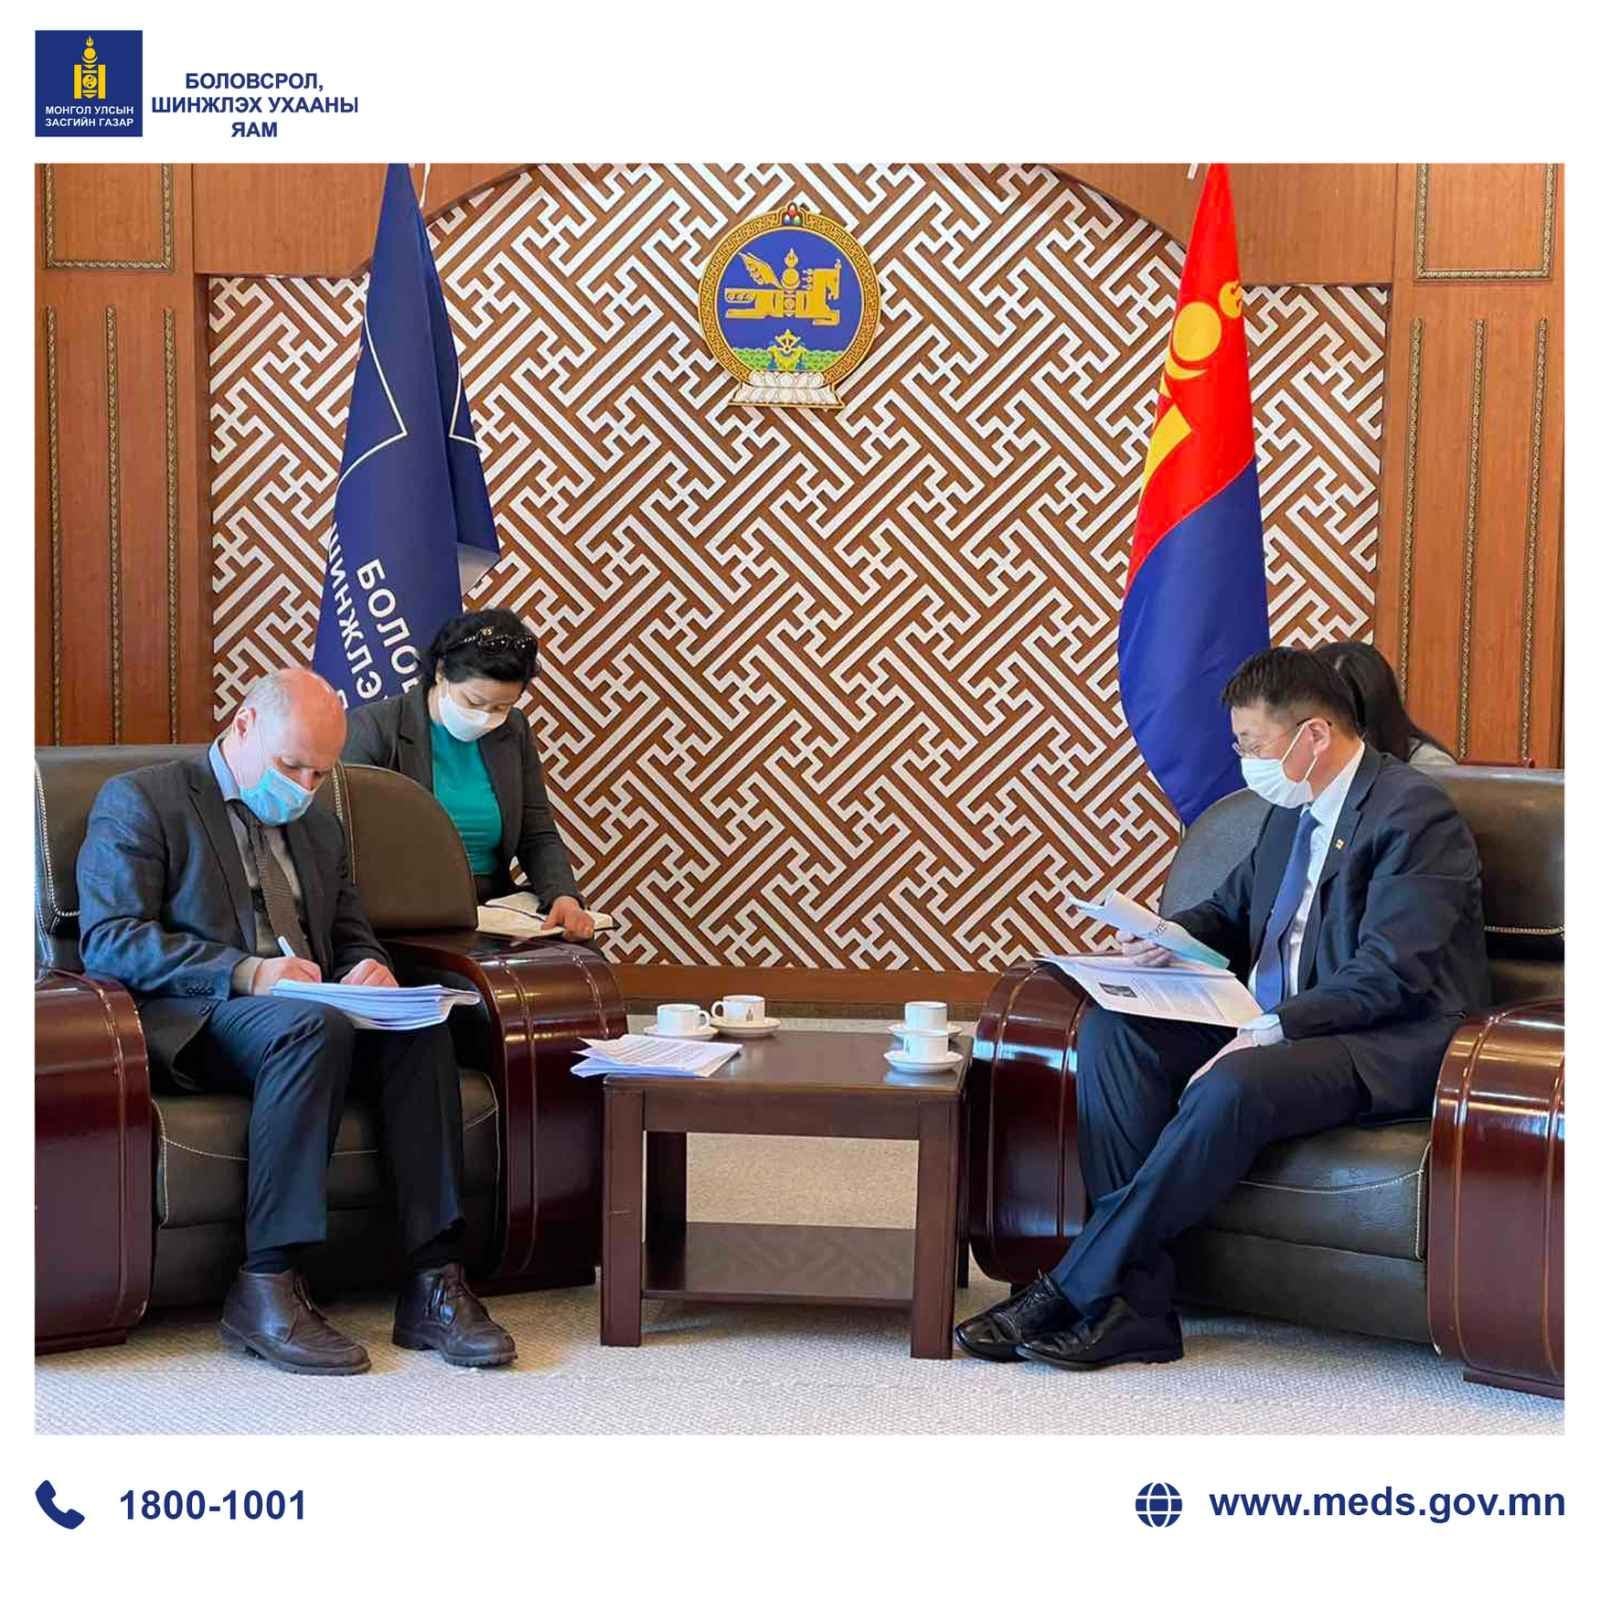 Minister of Education and Science L.Enkh-Amgalan welcomes The World Bank Human Development program manager Mr Ruslan Yemtsov